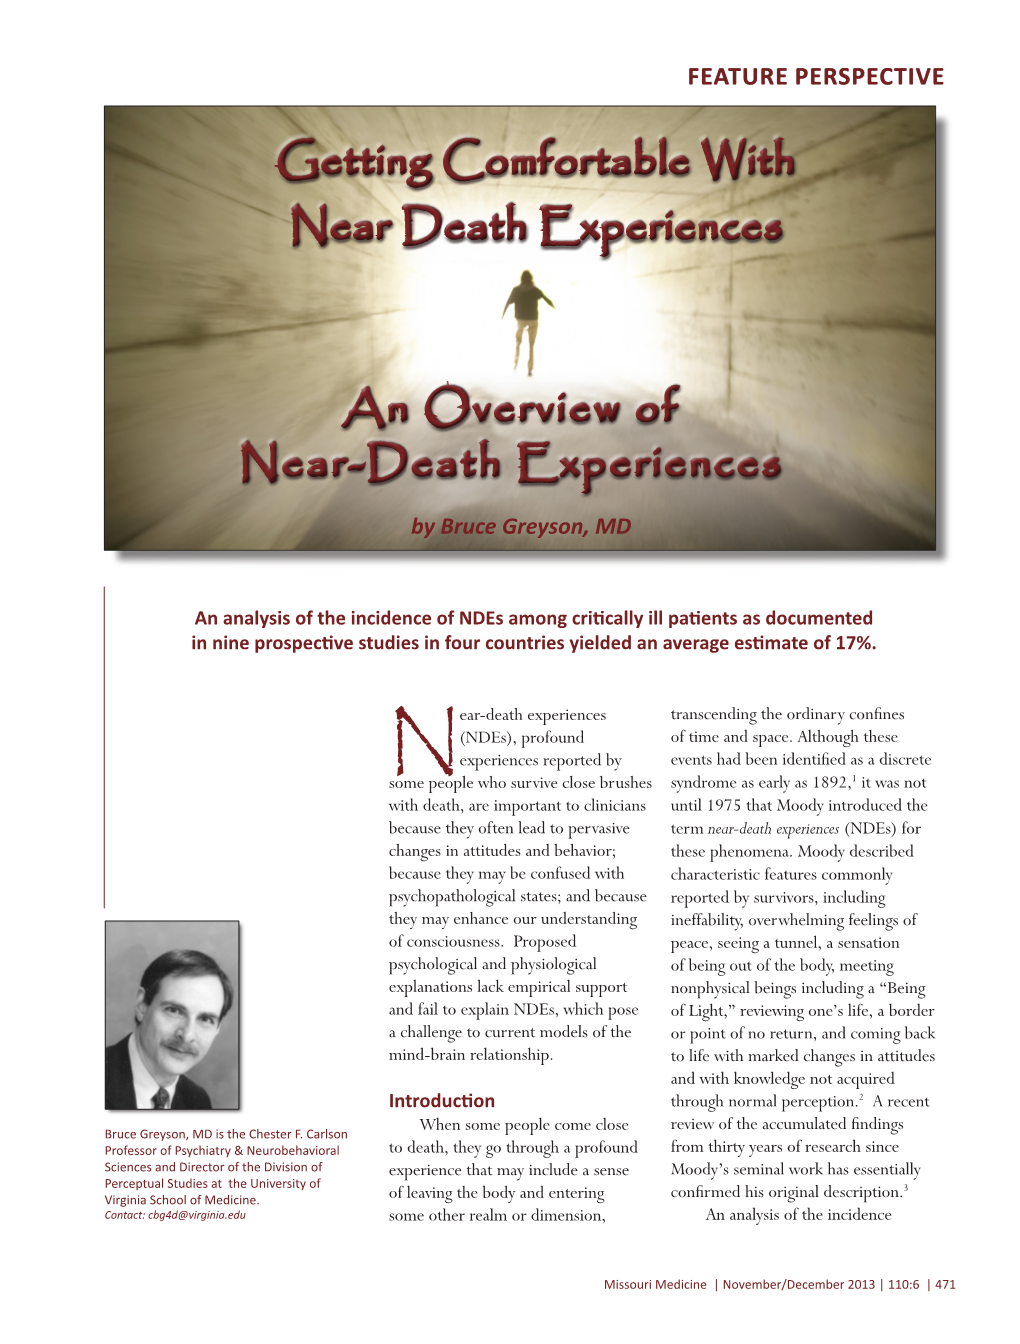 An Overview of Near-Death Experiences by Bruce Greyson, MD